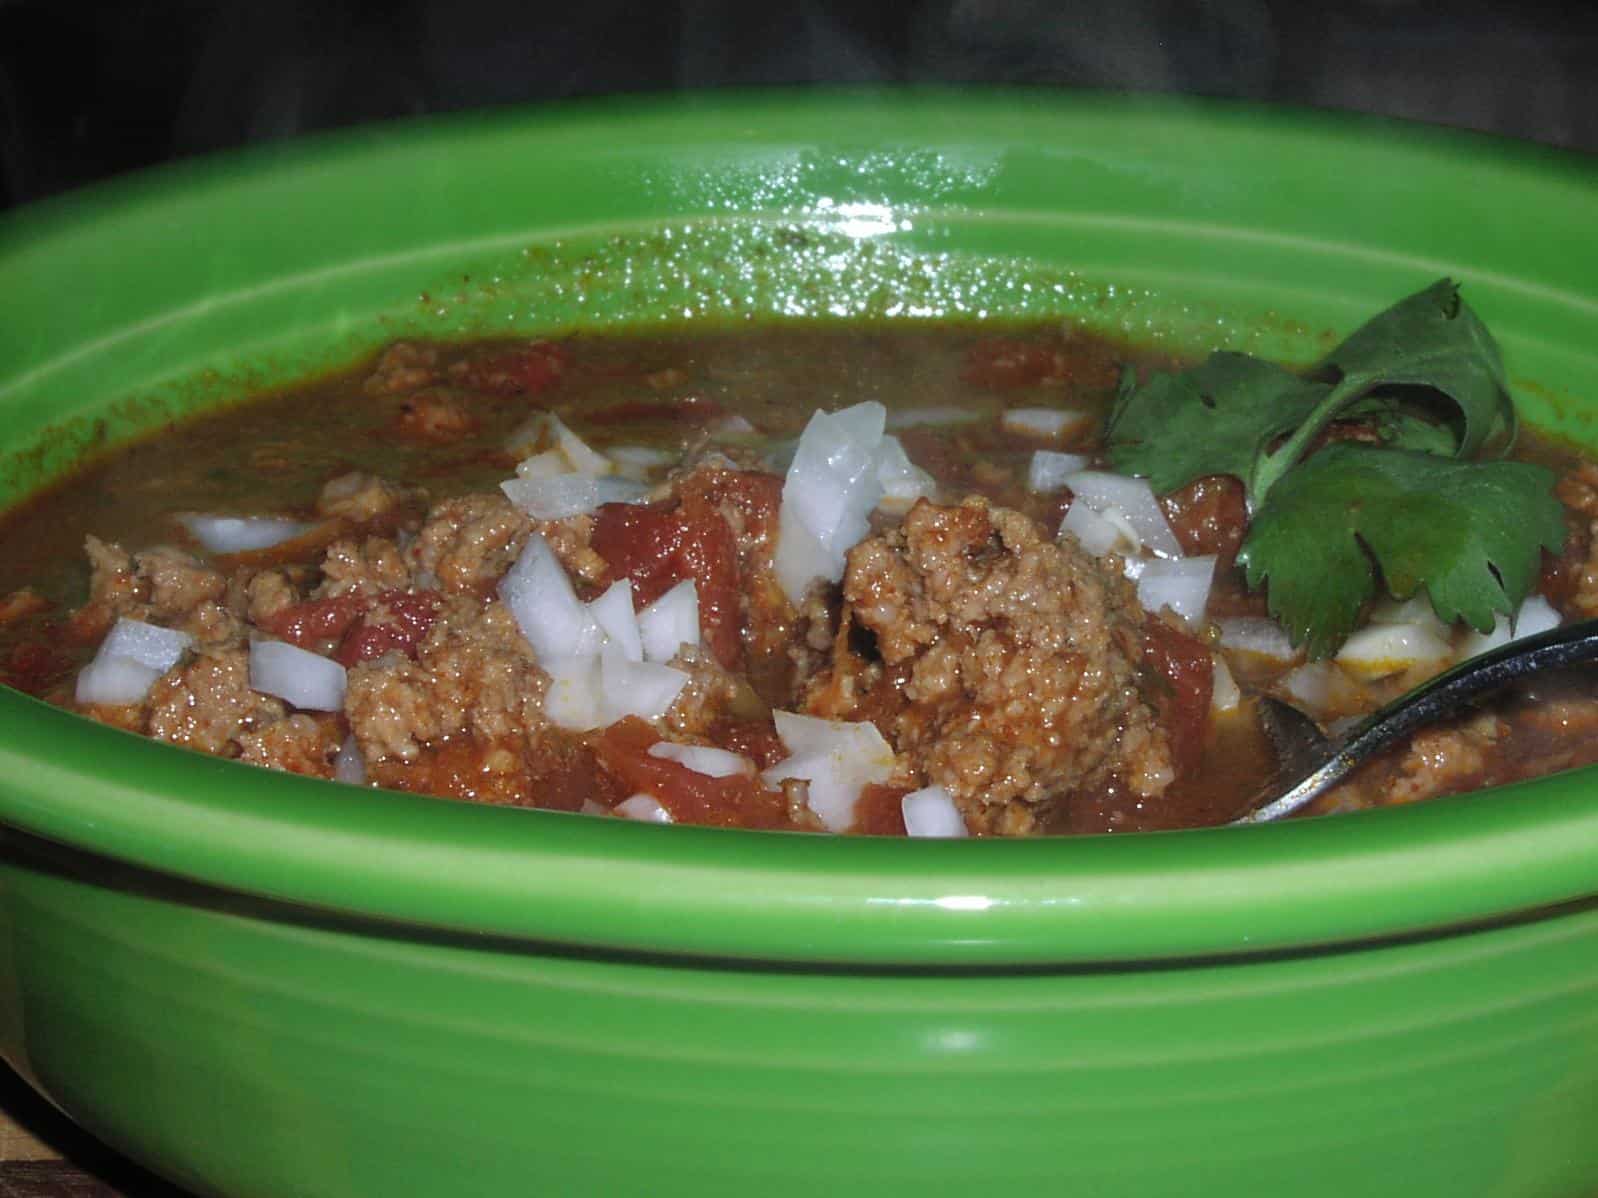  A warm and hearty bowl of chili, perfect for chilly days!